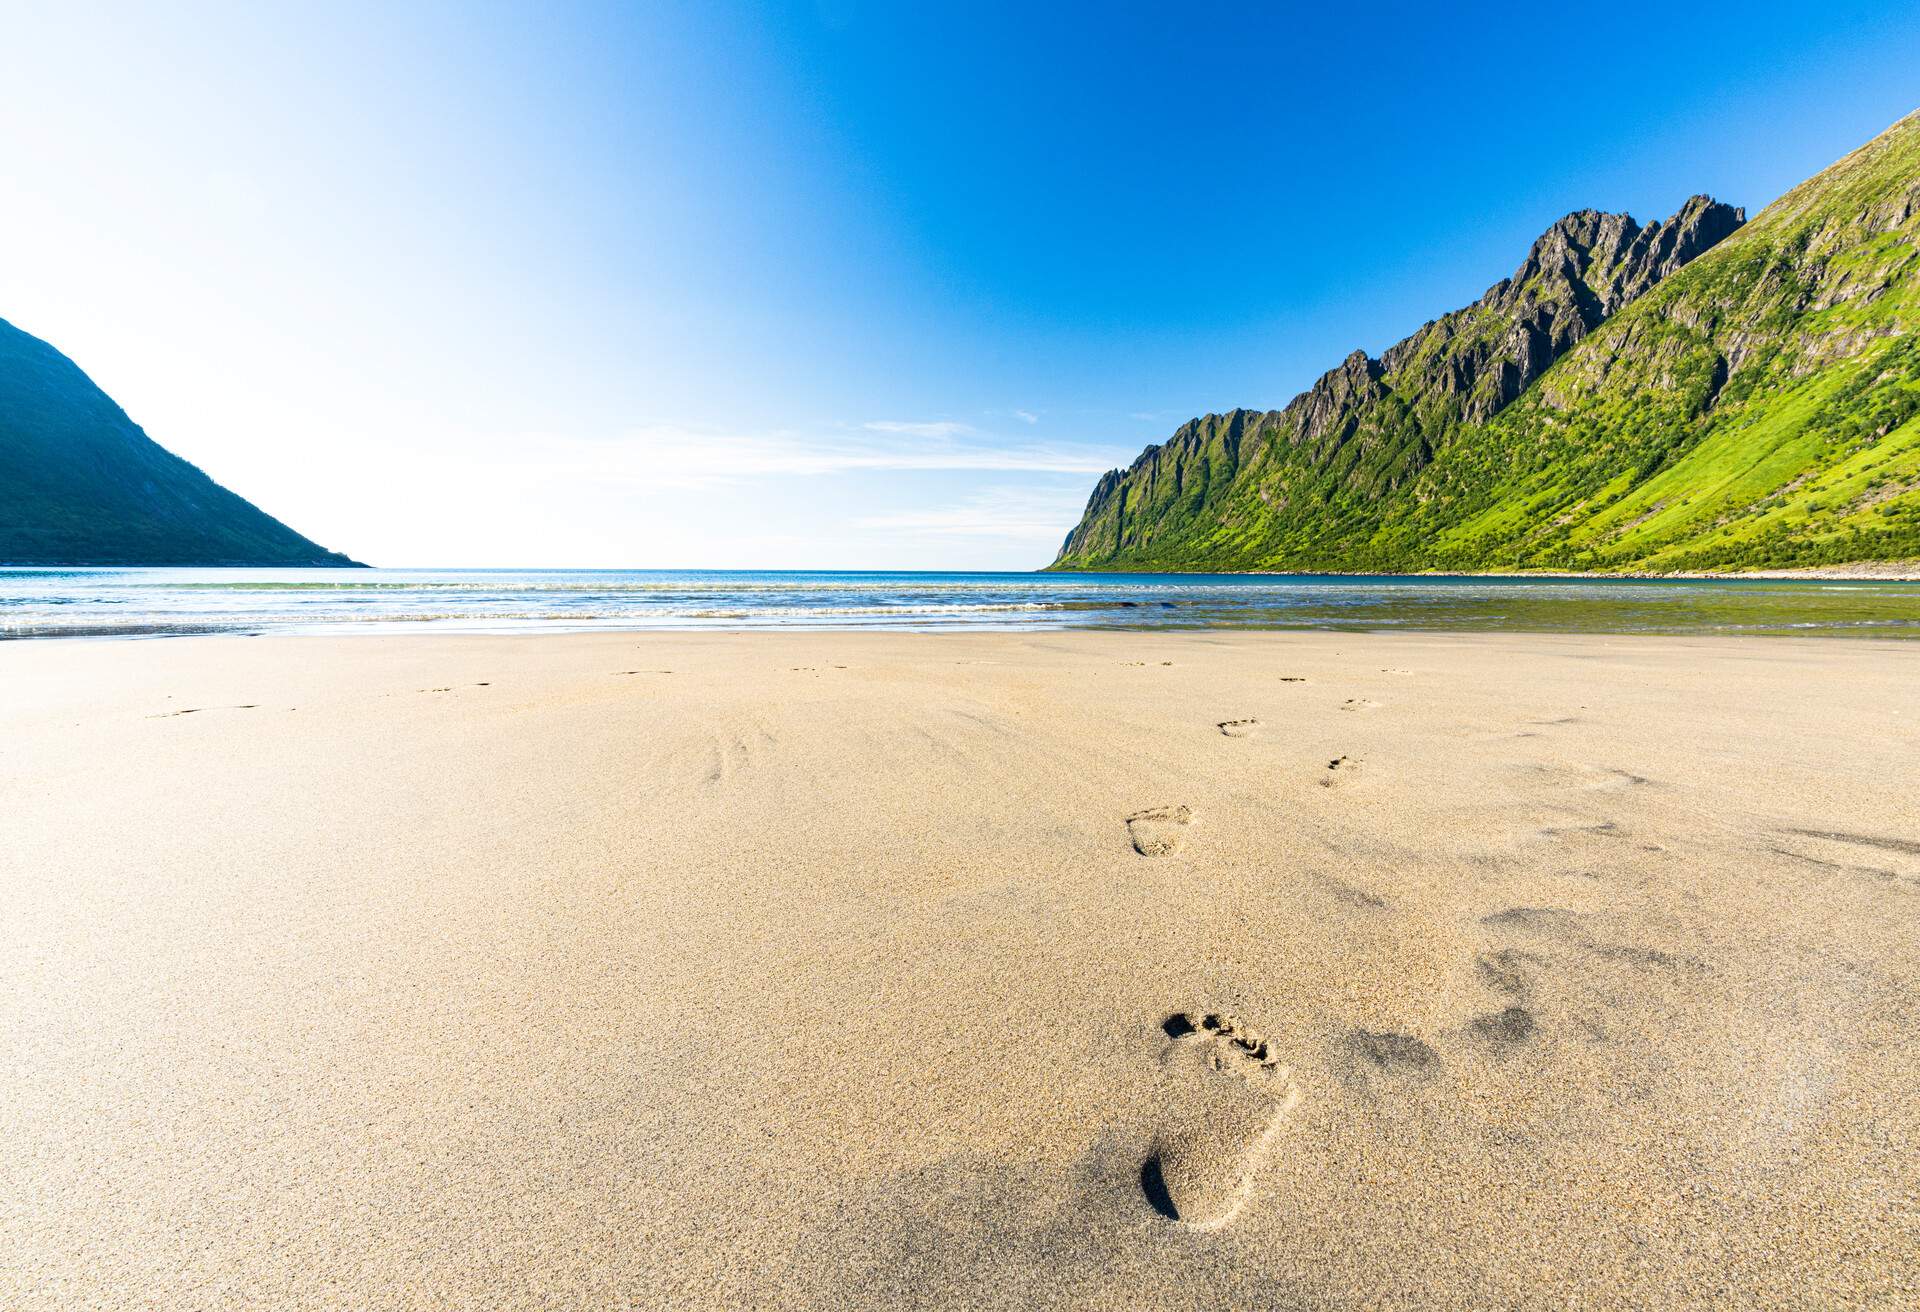 Sun shining over Ersfjord beach and fjord during summer with footprints in the sand, Senja, Troms county, Norway